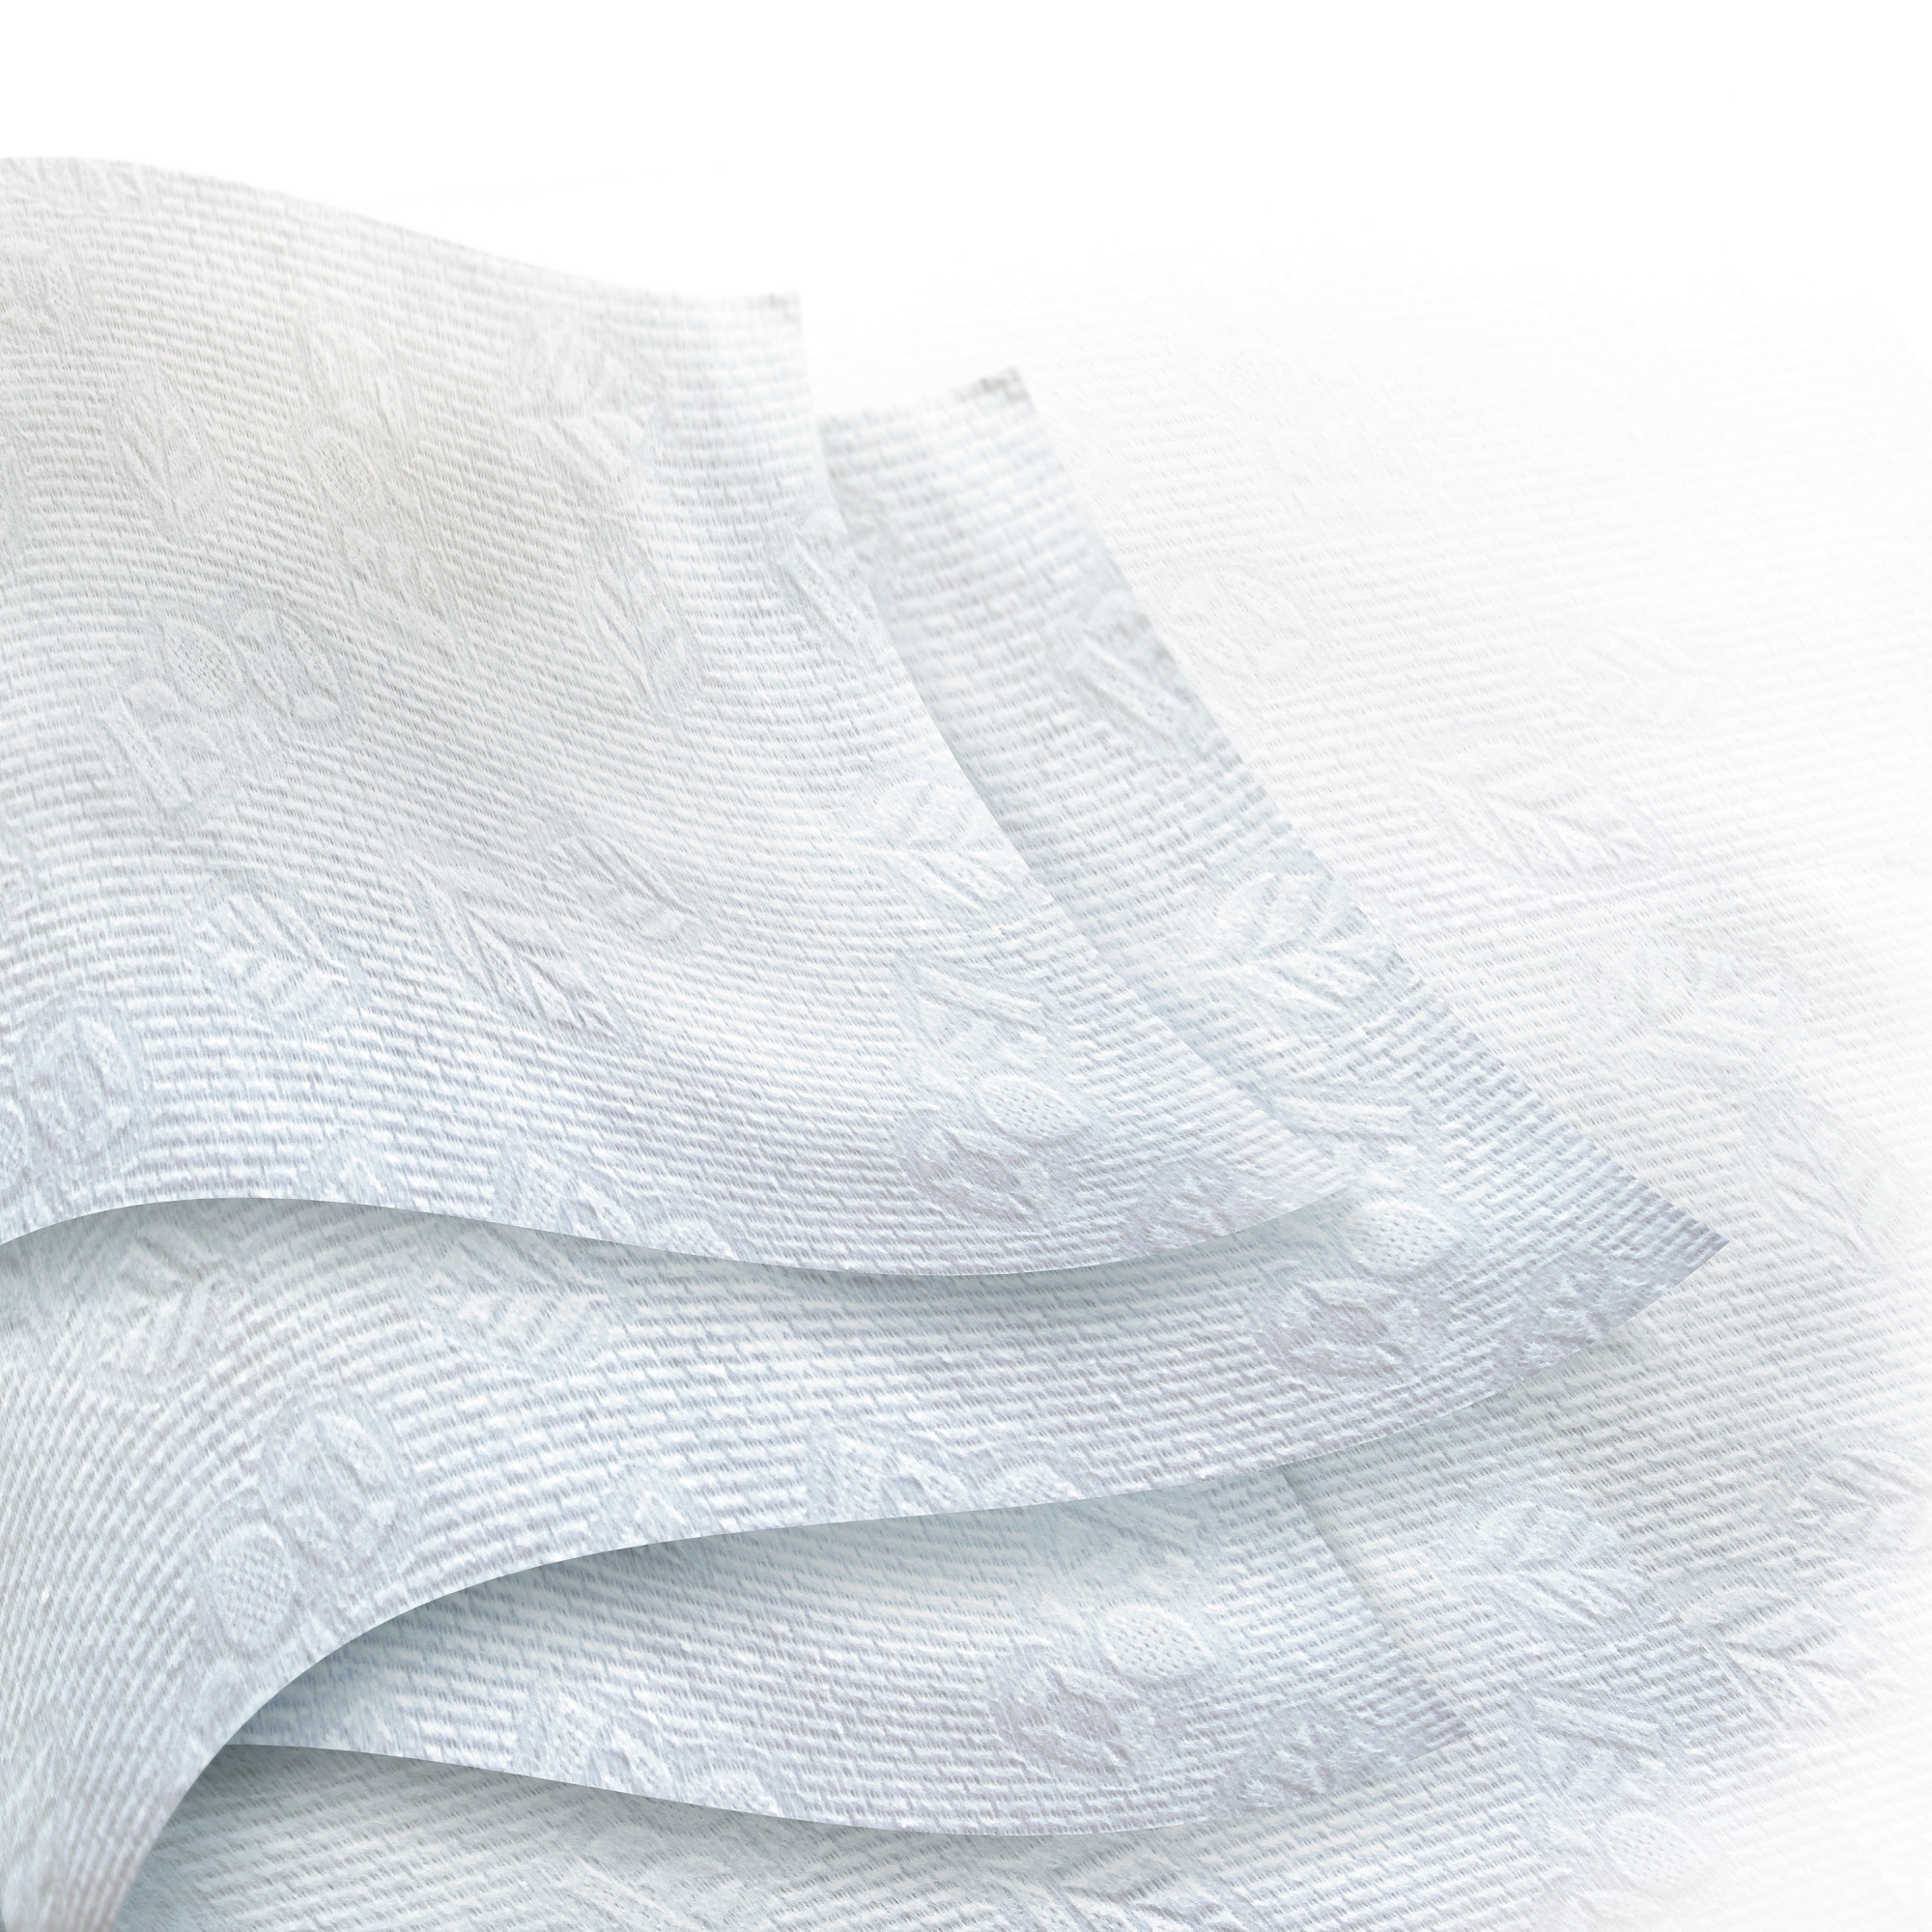 The PEFC-certified substrate bio-textile from Sandler is made only from viscose fibres sourced from European forests.